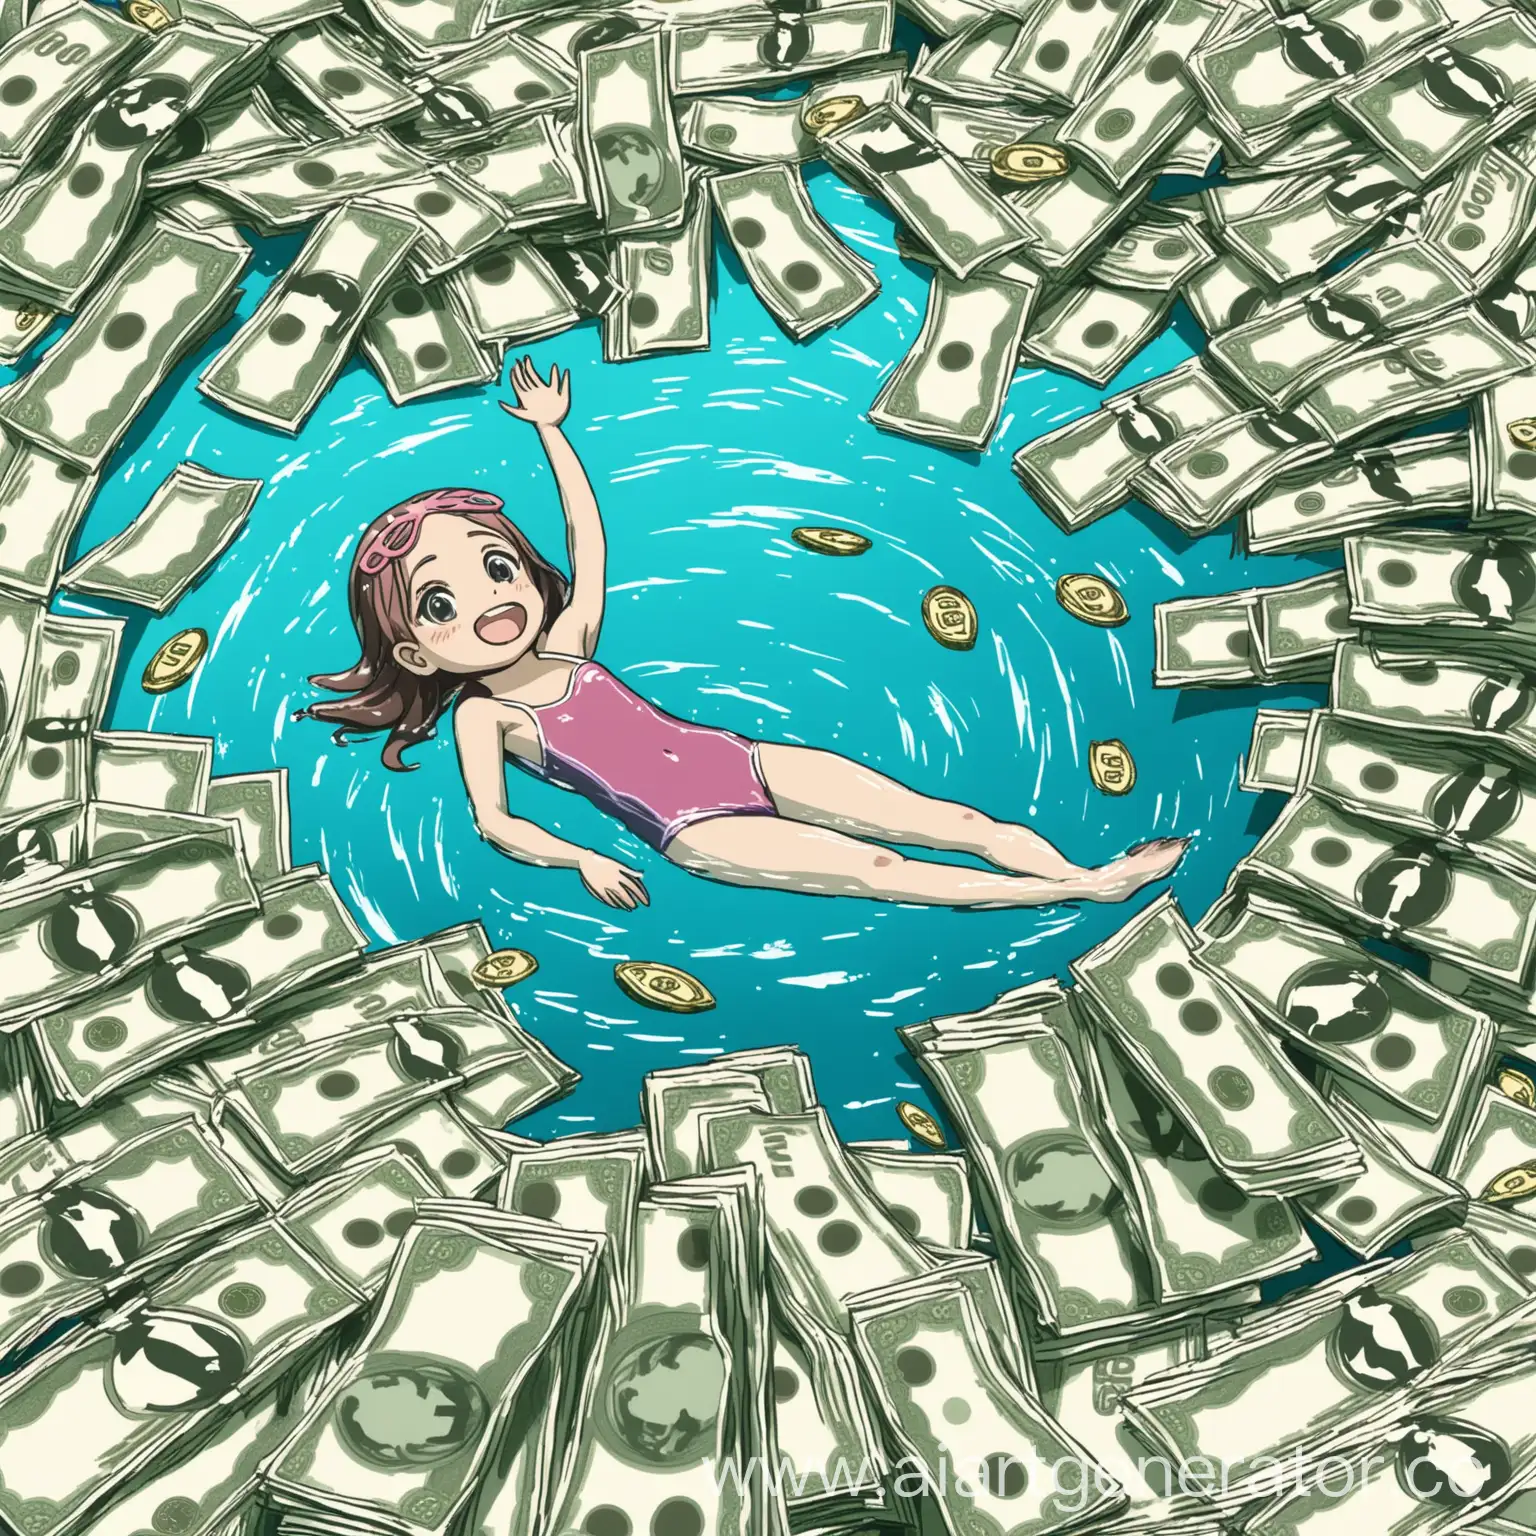 Girl-Swimming-in-Money-Wealthy-Child-Enjoys-a-Playful-Dip-in-Cash